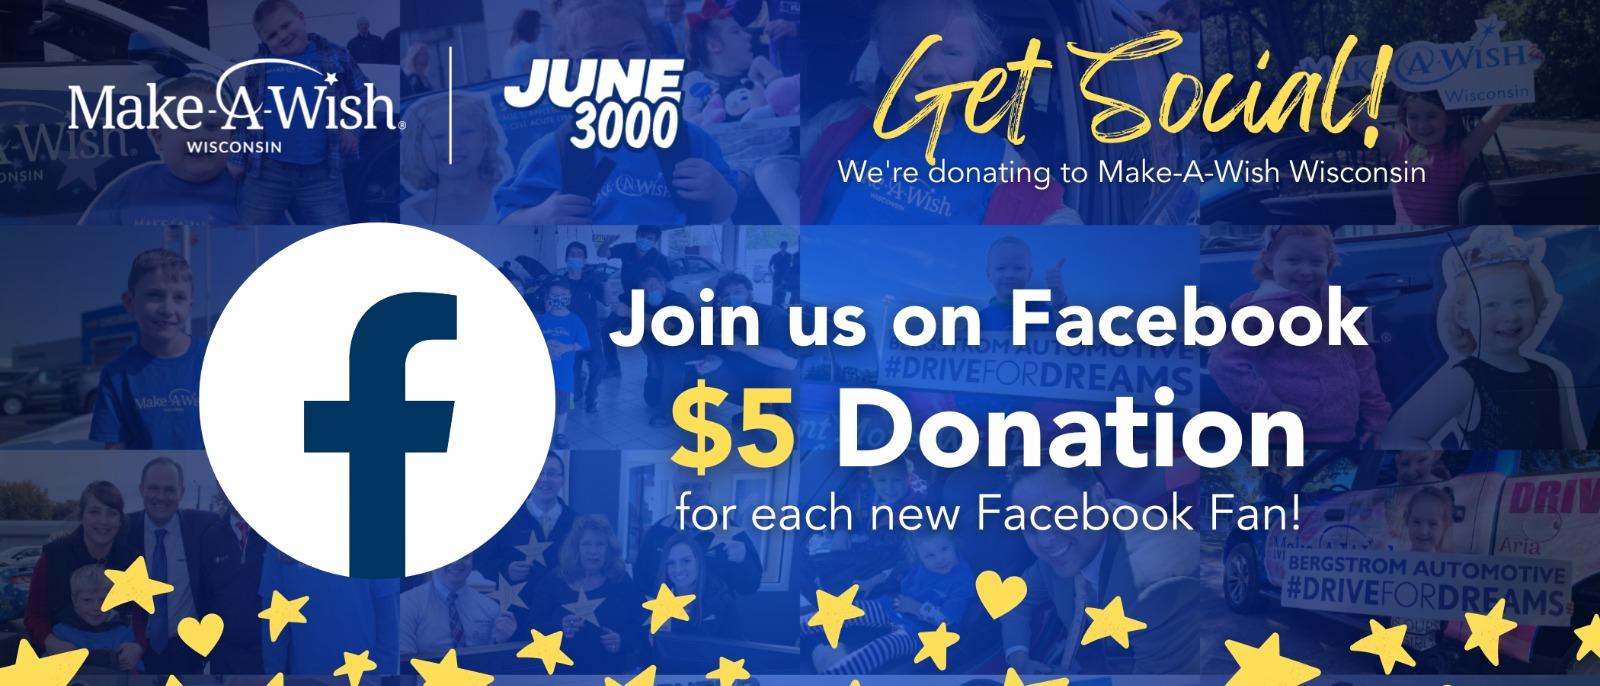 Get Social join us on Facebook $5 donation for each new Facebook Fan!